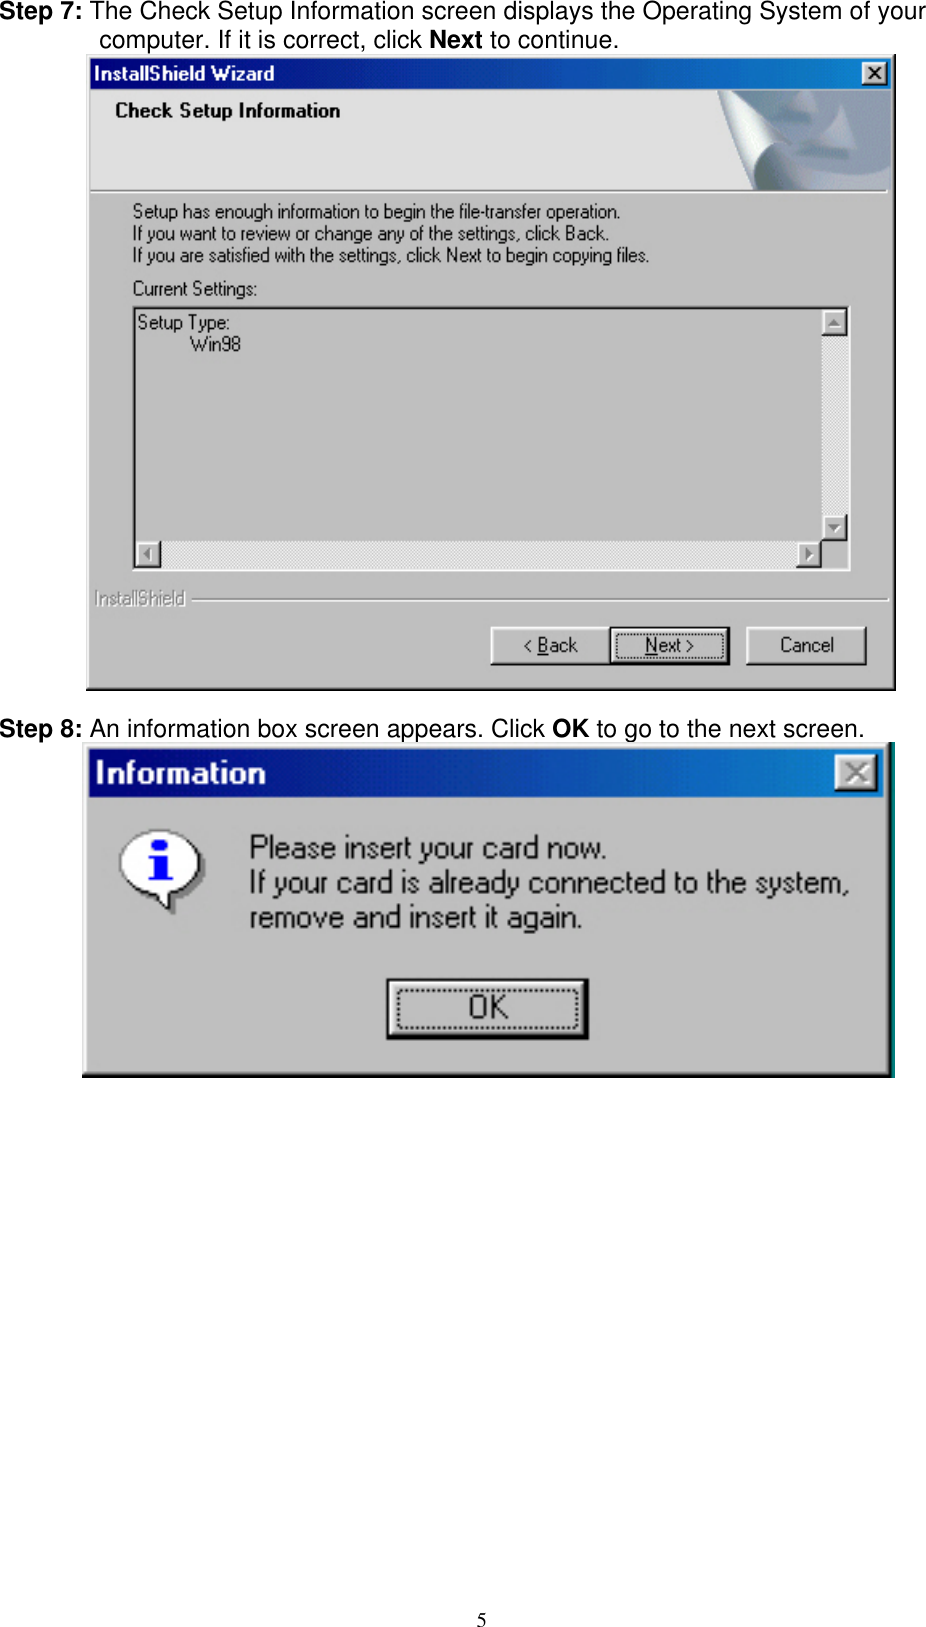 5  Step 7: The Check Setup Information screen displays the Operating System of your computer. If it is correct, click Next to continue.           Step 8: An information box screen appears. Click OK to go to the next screen.                      